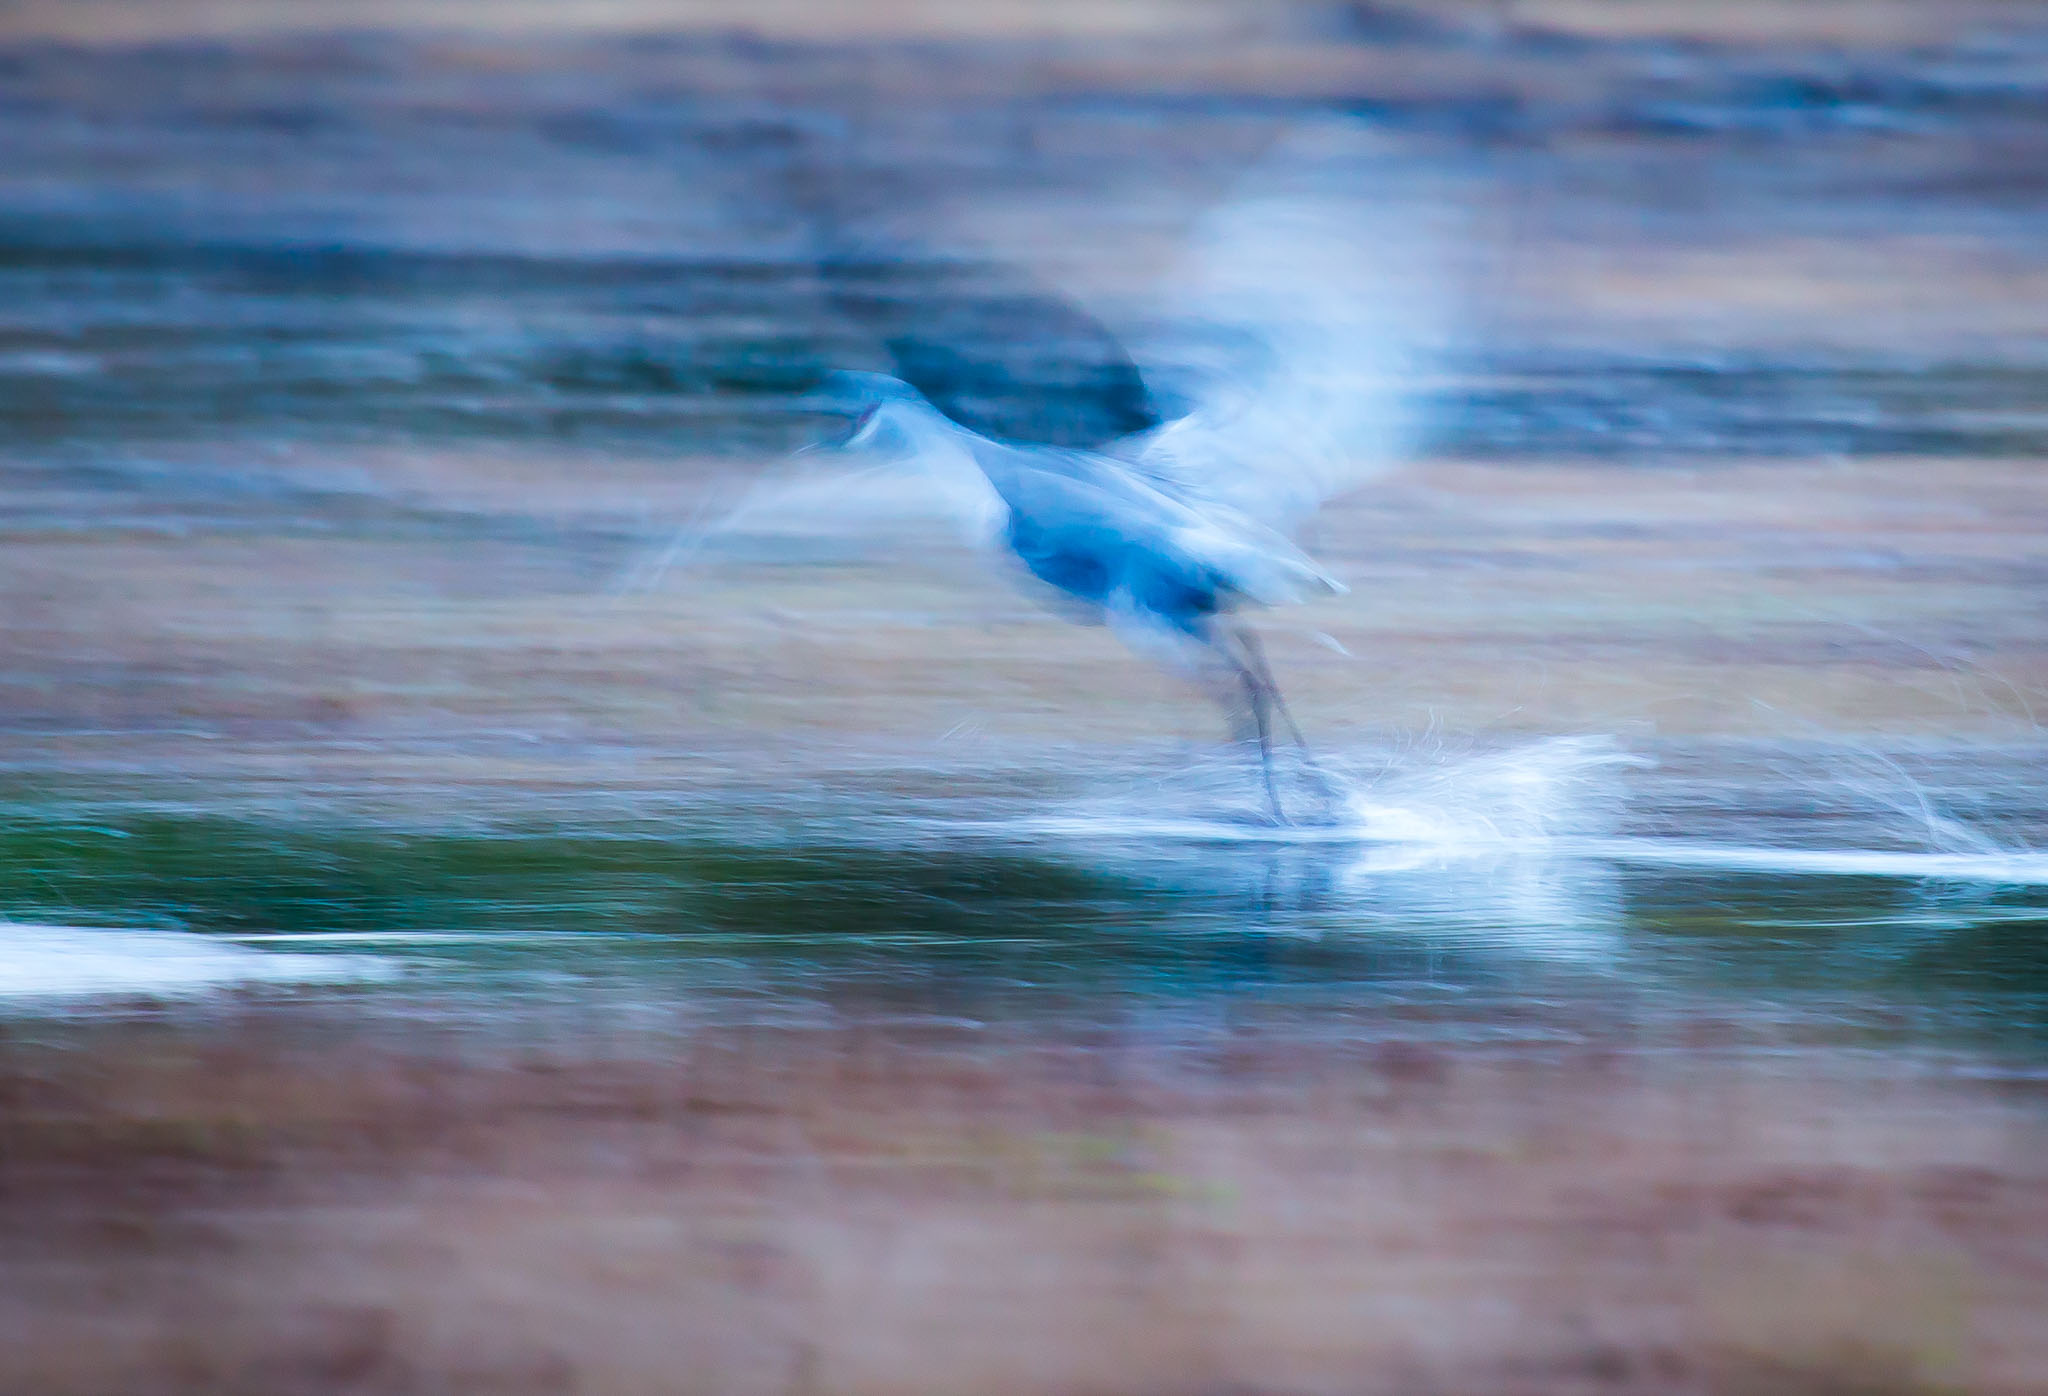 Sandhill Crane taking off from the Bosque, October 27, 2014